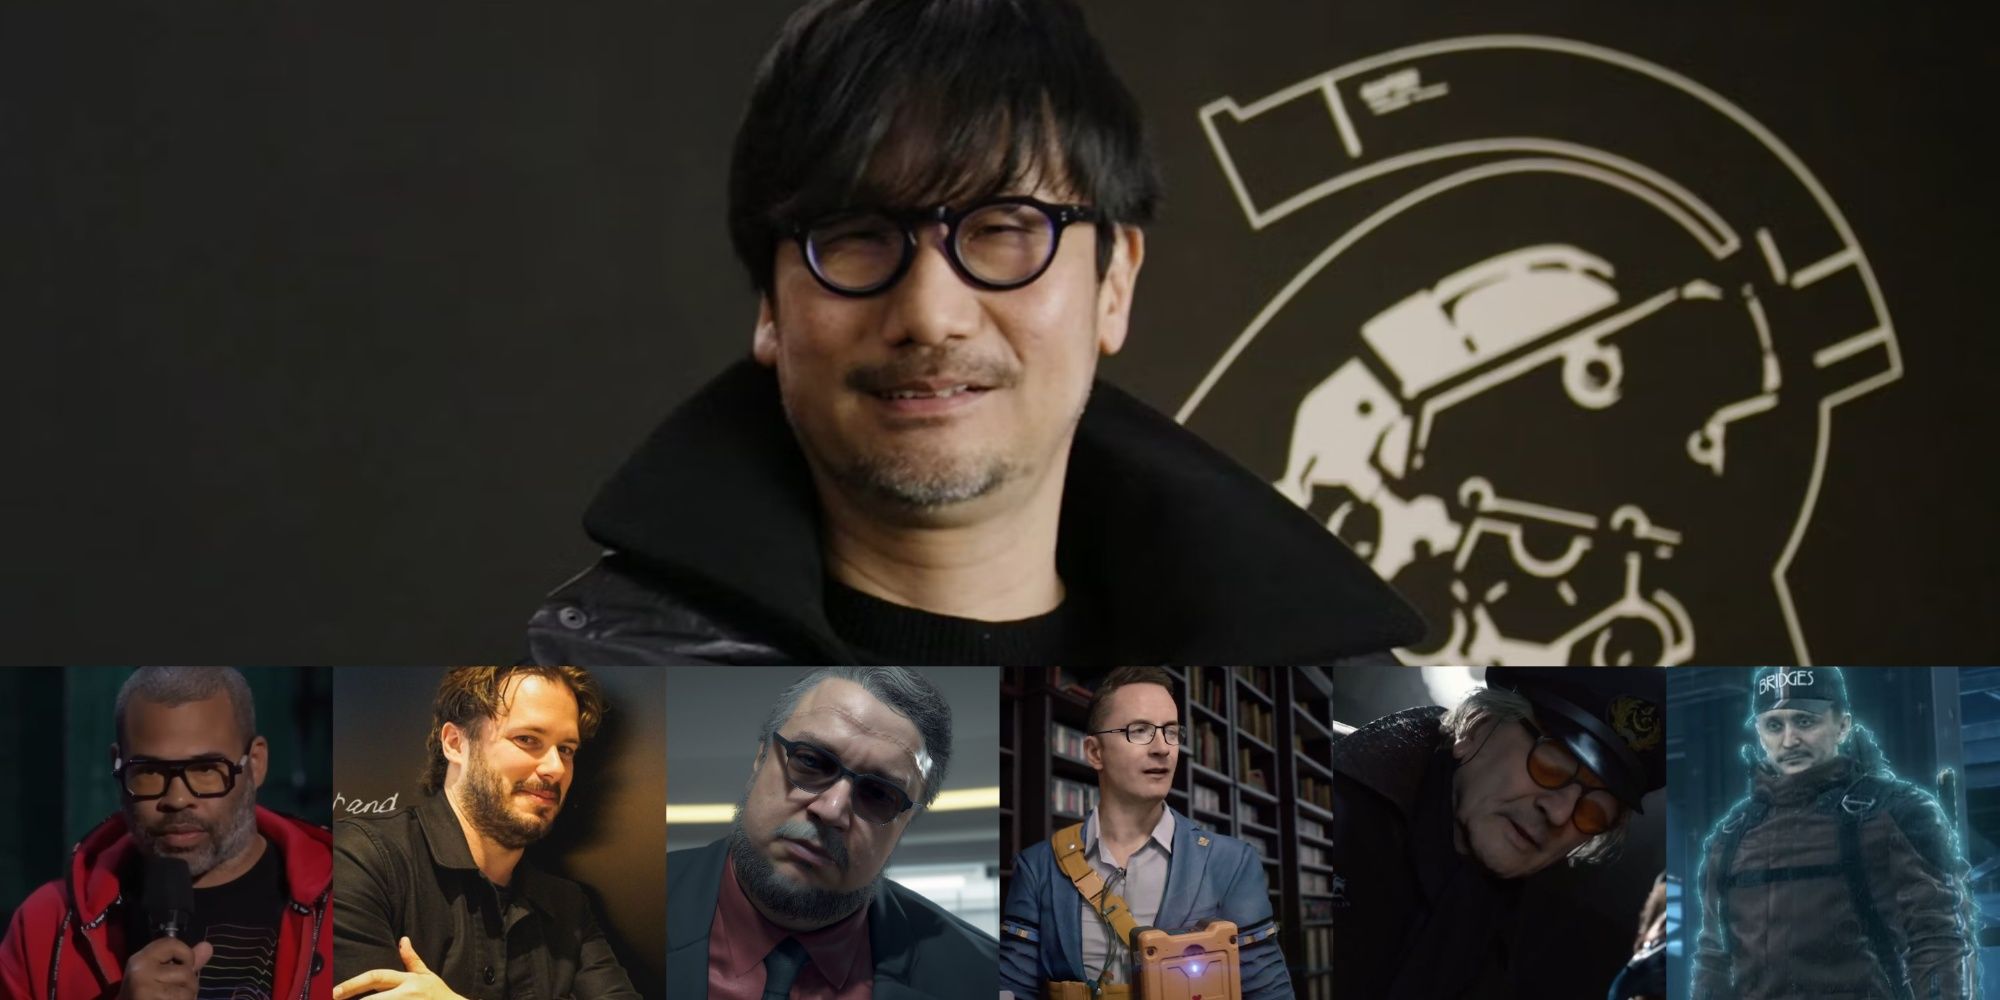 A seven-image collage featuring Hideo Kojima by the KP studio logo at the top, followed by squares of Jordan Peele, Edgar Wright, Guillermo del Toro, Nicolas Winding Refn, George Miller, and Tommy Wirkola.